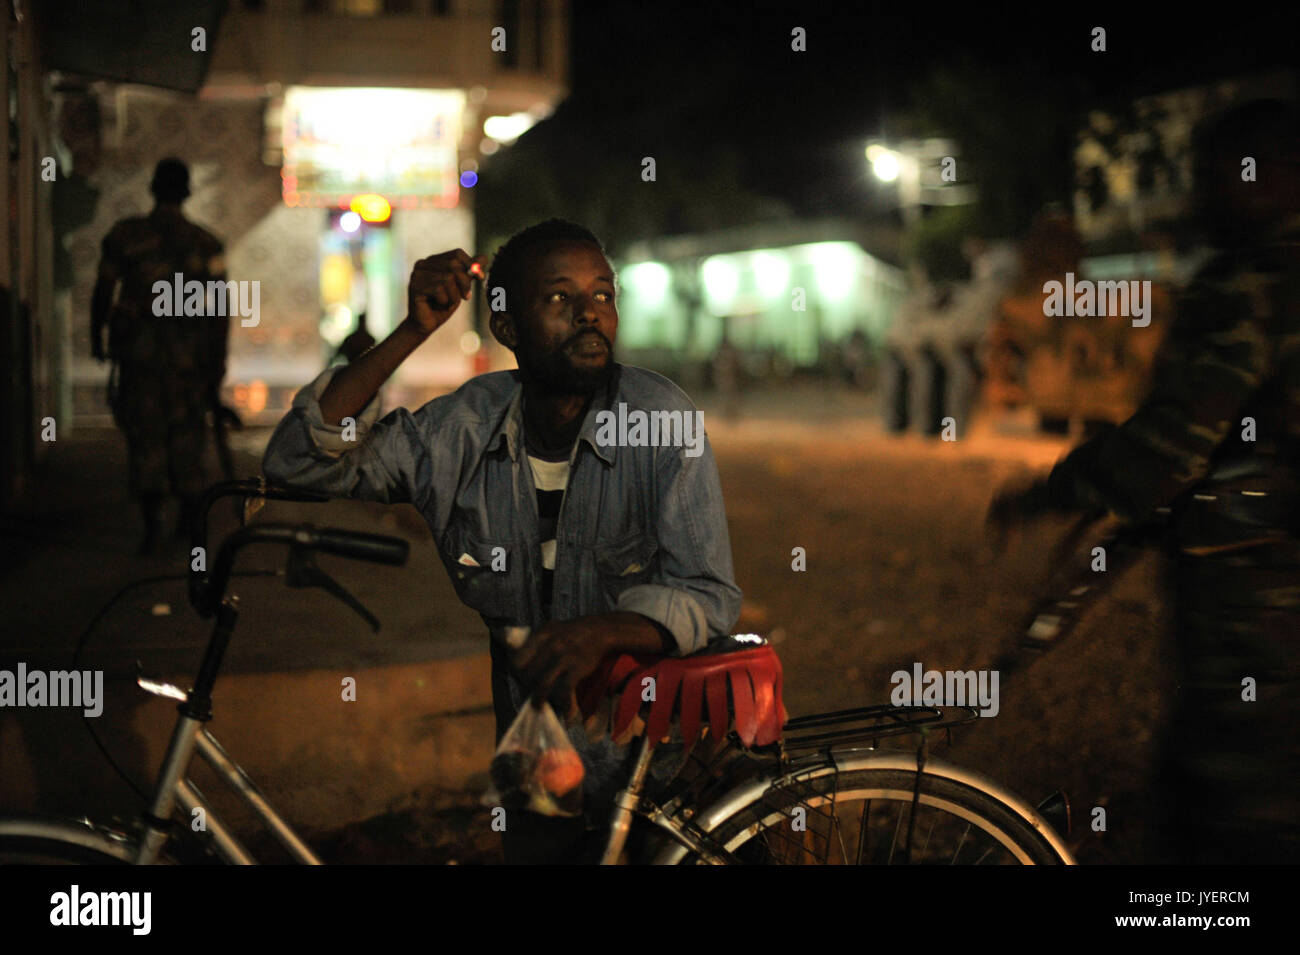 A Somali man smokes a cigarette while Ethiopian soldiers, as part of the African Union Mission in Somalia, conduct a night patrol through the city of Baidoa, Somalia, on June 22. AMISOM Photo   Tobin (14332224890) Stock Photo